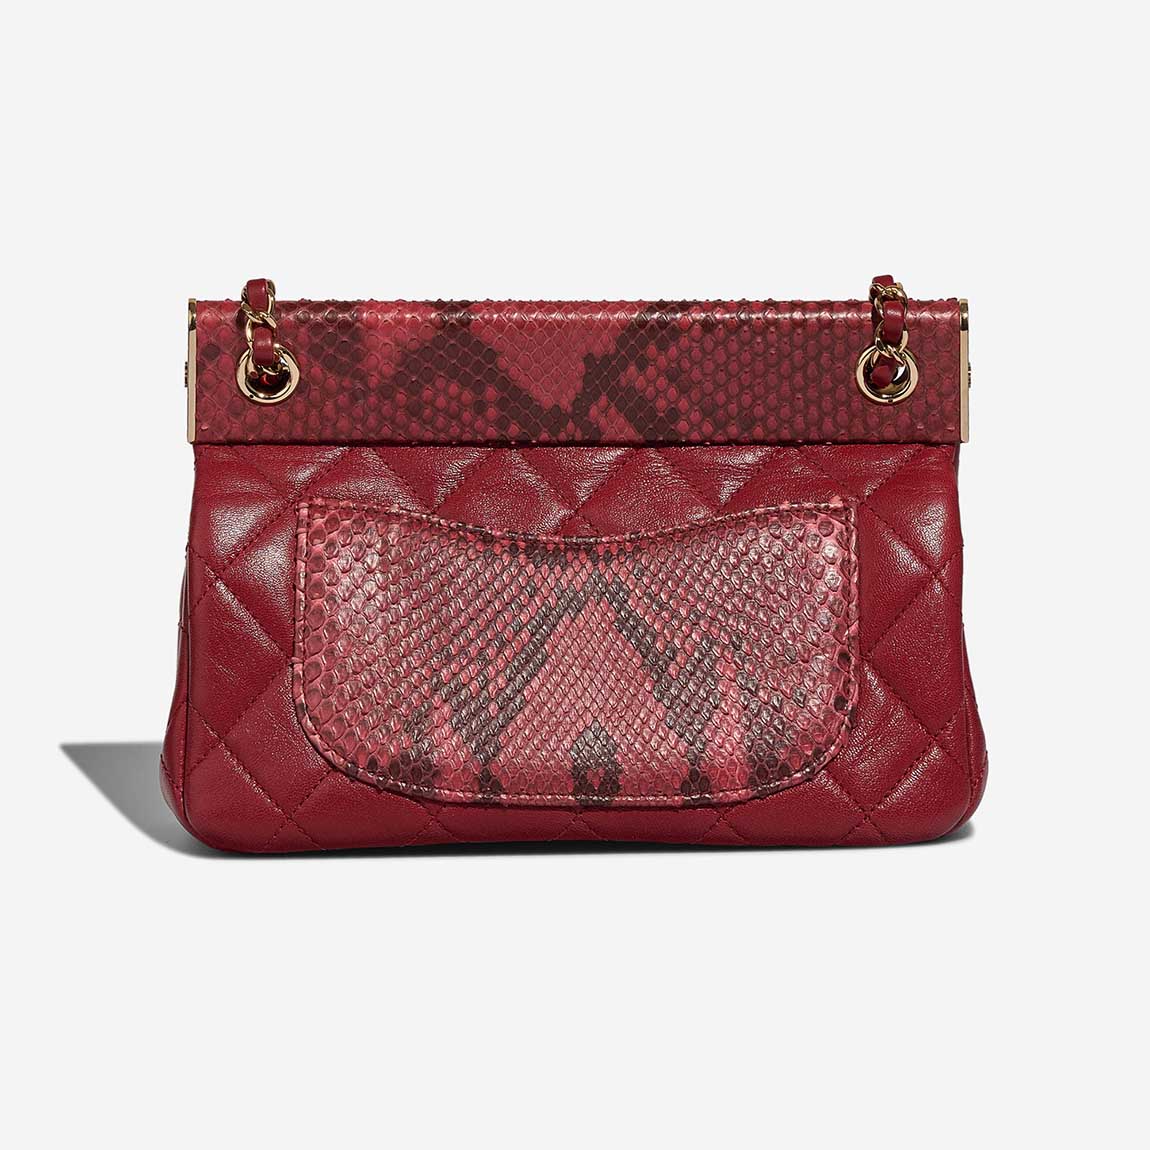 Chanel Timeless Small Aged Calf / Python Red | Sell your designer bag